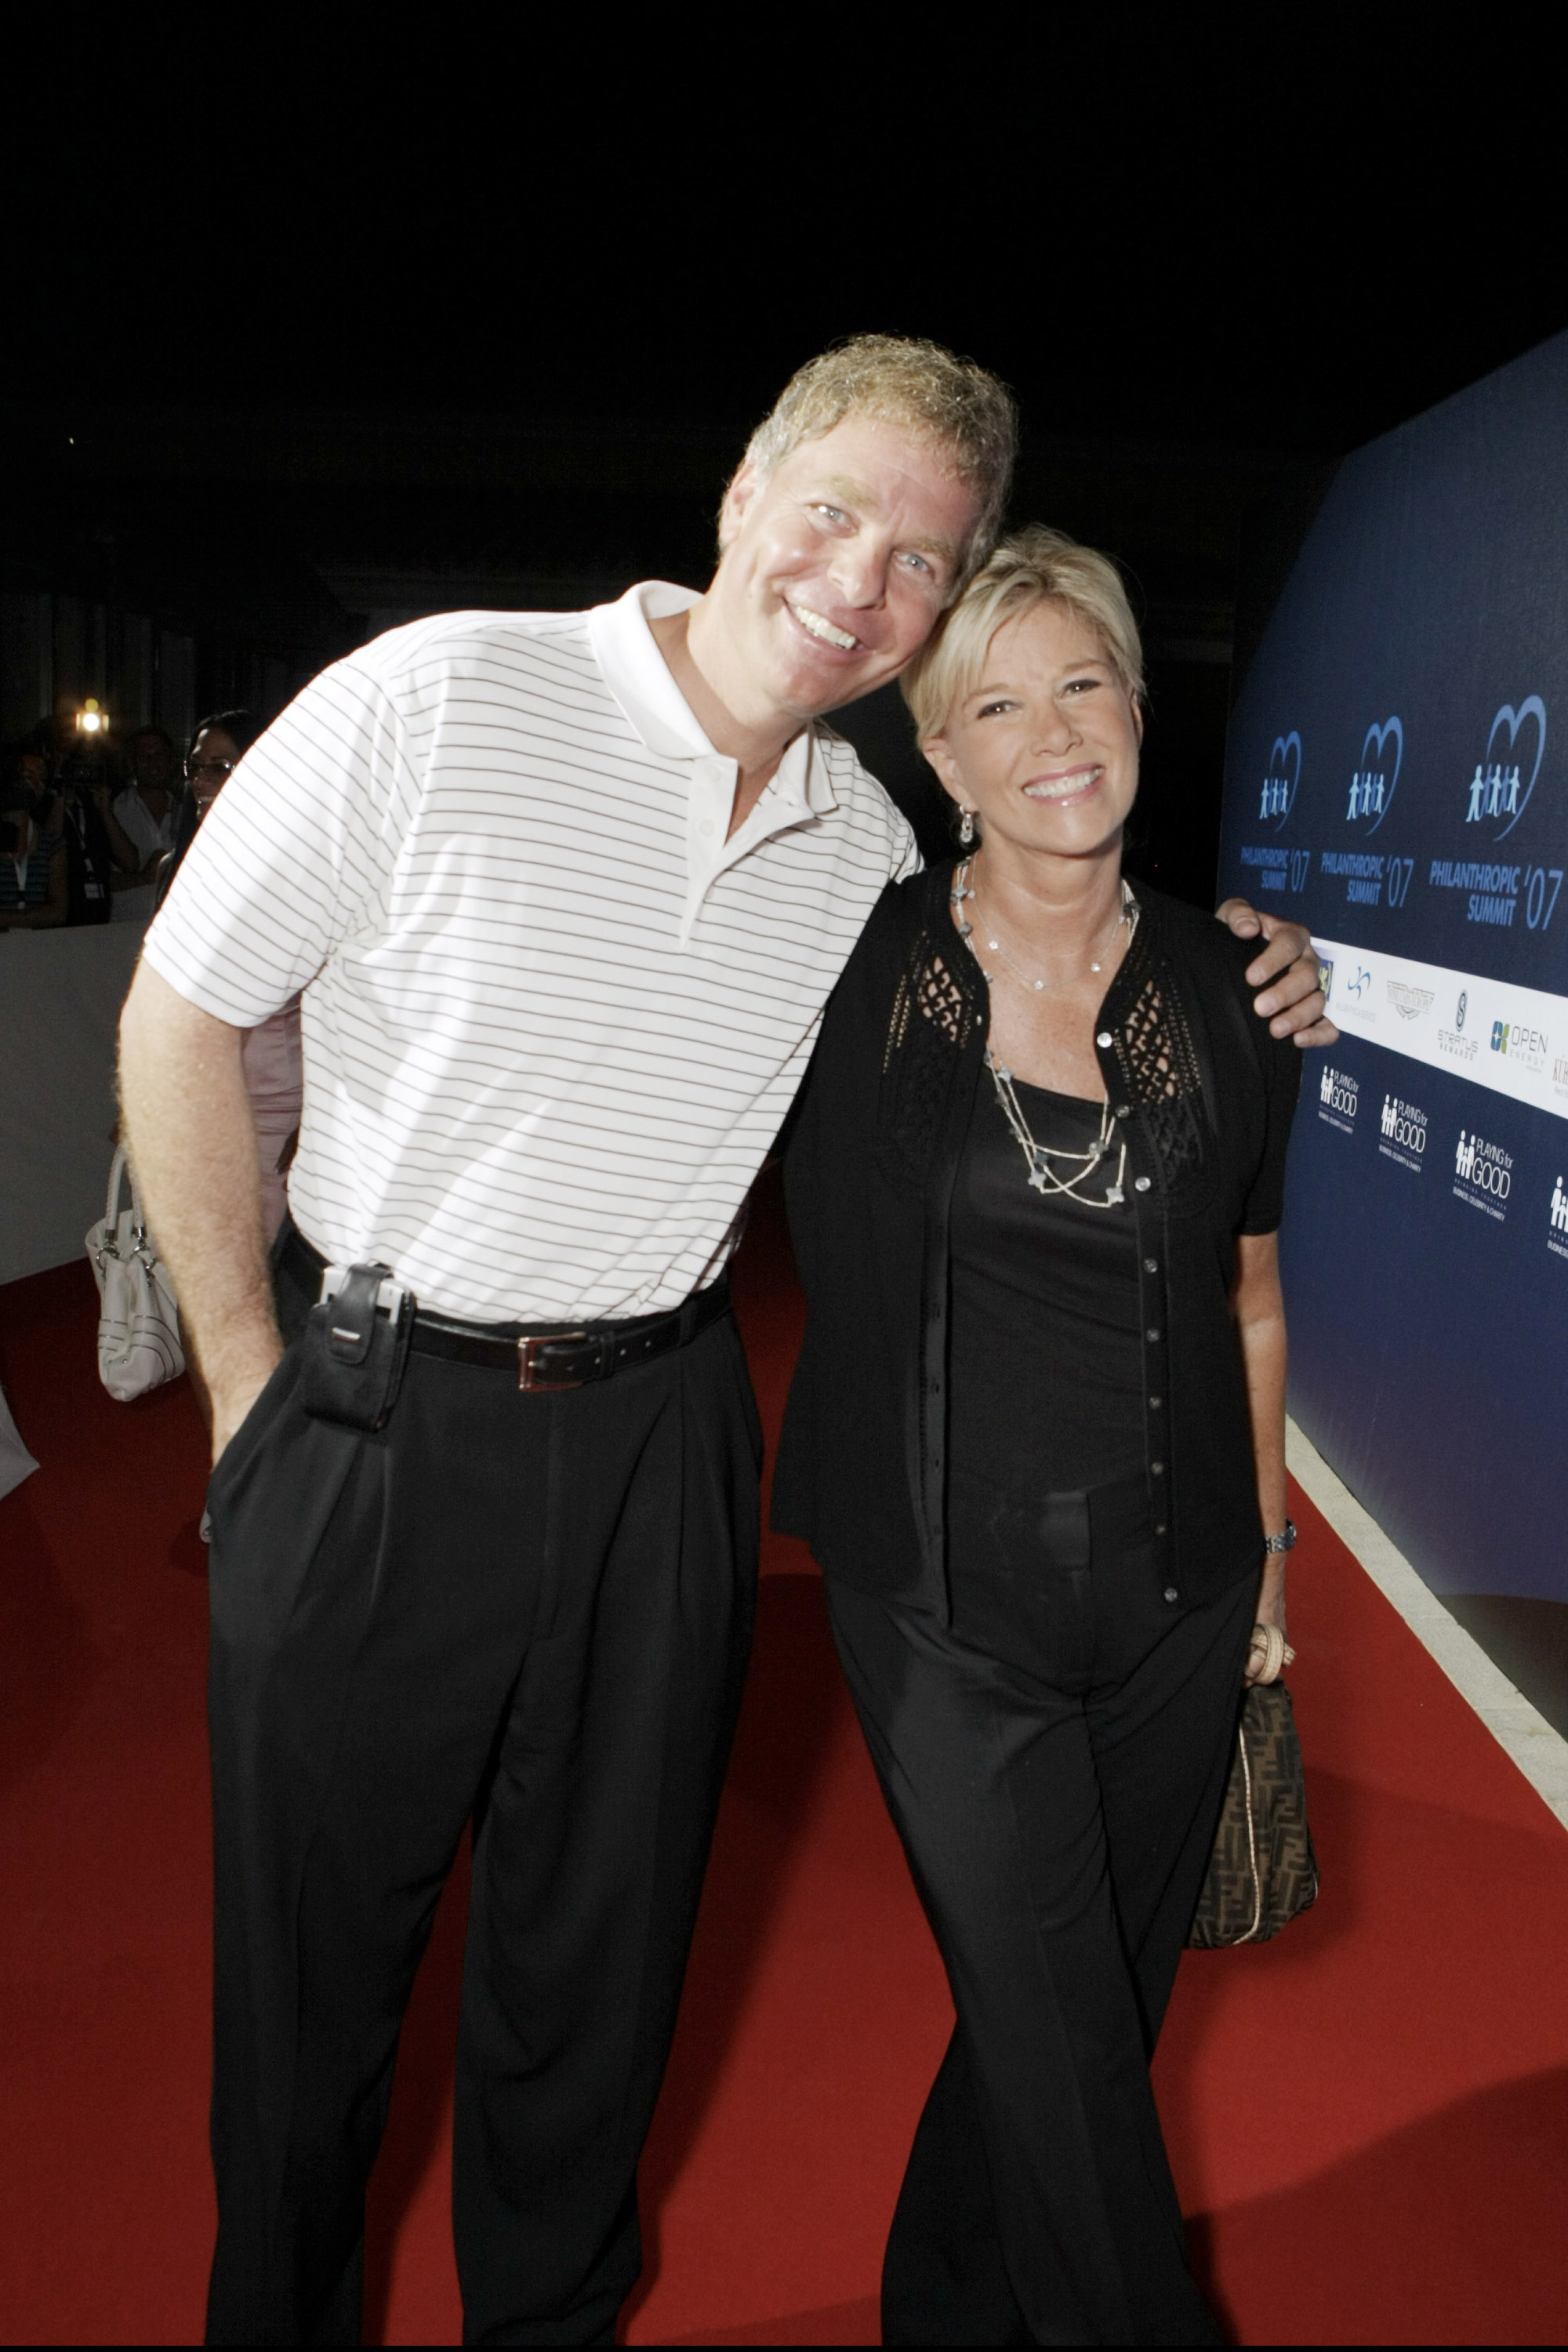 Jeff Konigsberg and Joan Lunden at the Playing for Good Foundation Poolside Party at the Dorint Hotel in Mallorca, Spain on August 30, 2007. | Source: Getty Images